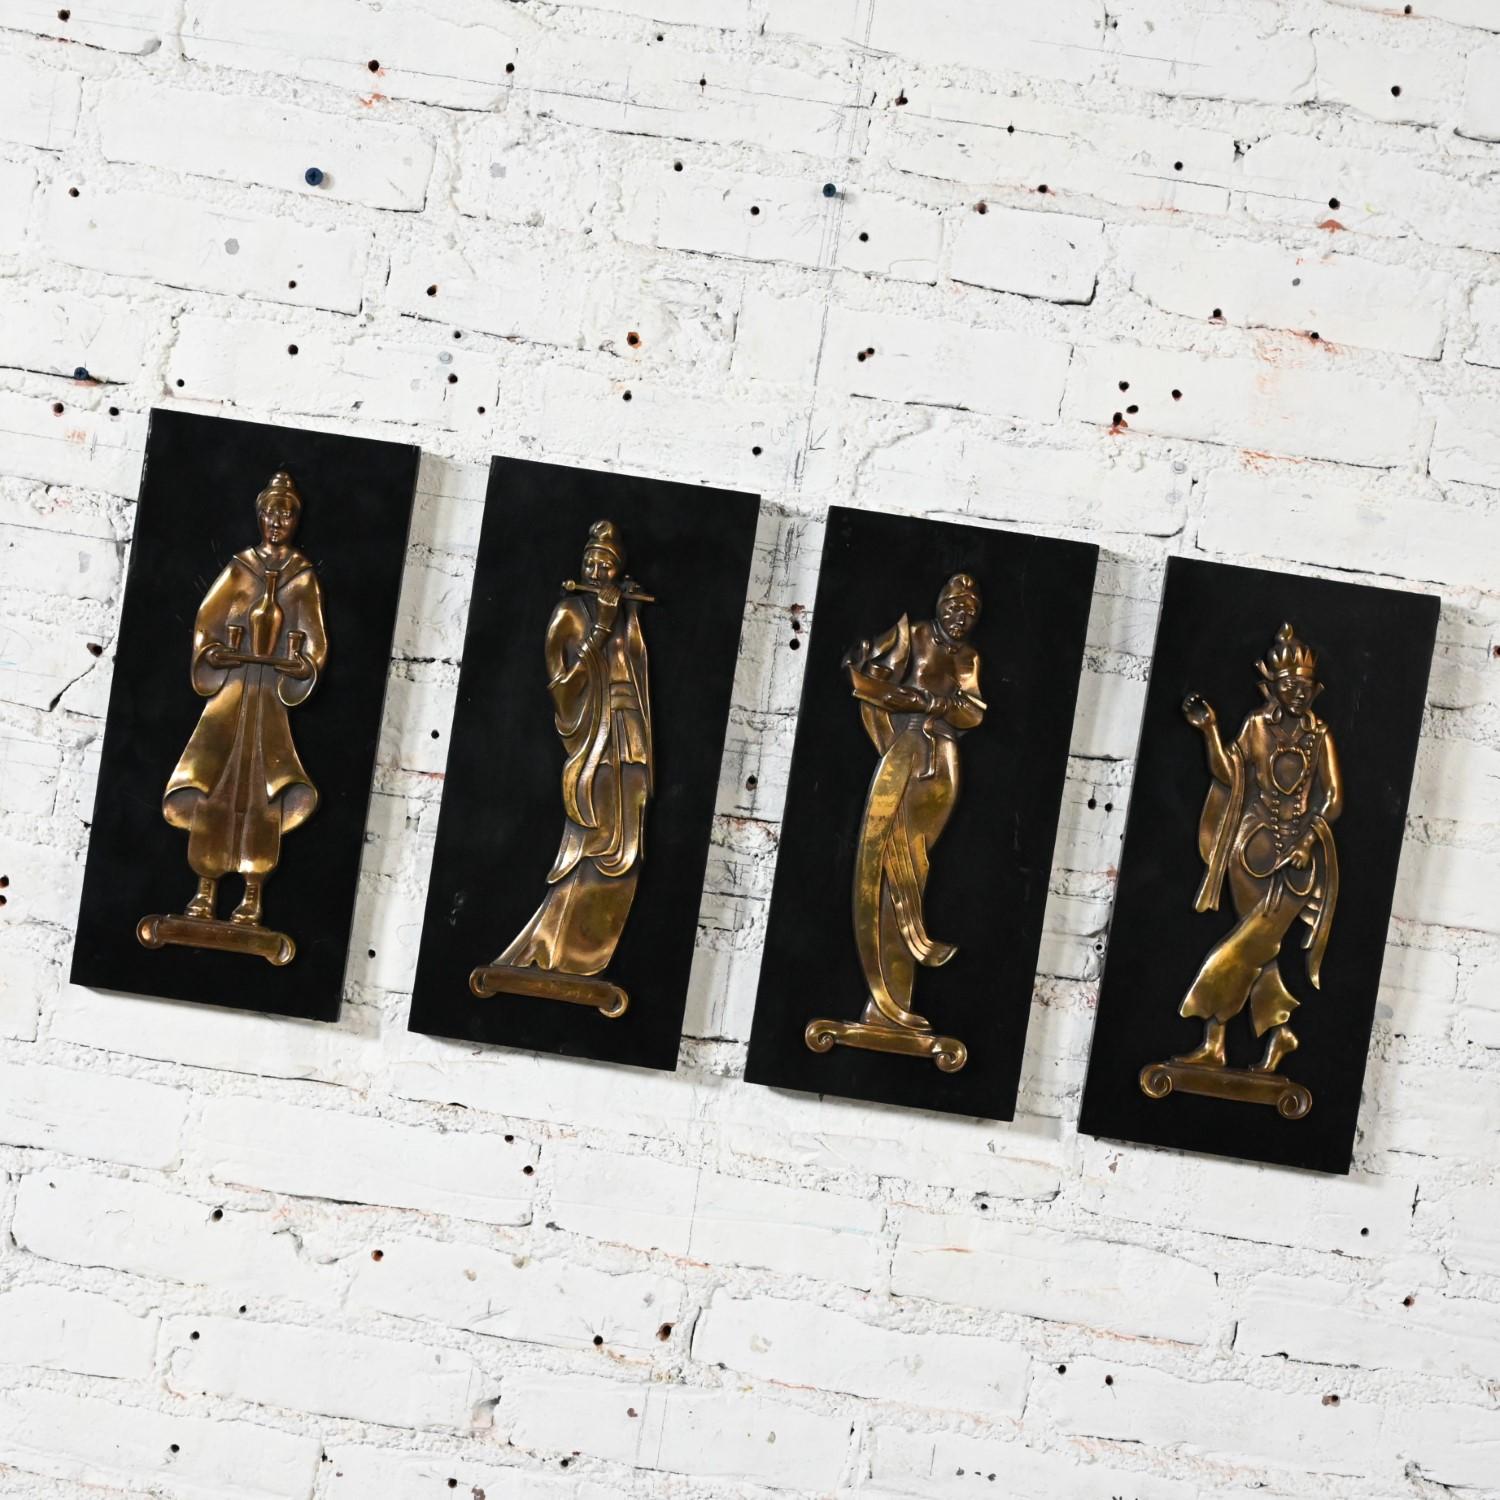 Chinoiserie 4 Mid-20th Century Asian Cast Bronze Figures on Black Wood Plaques Signed Gansu For Sale